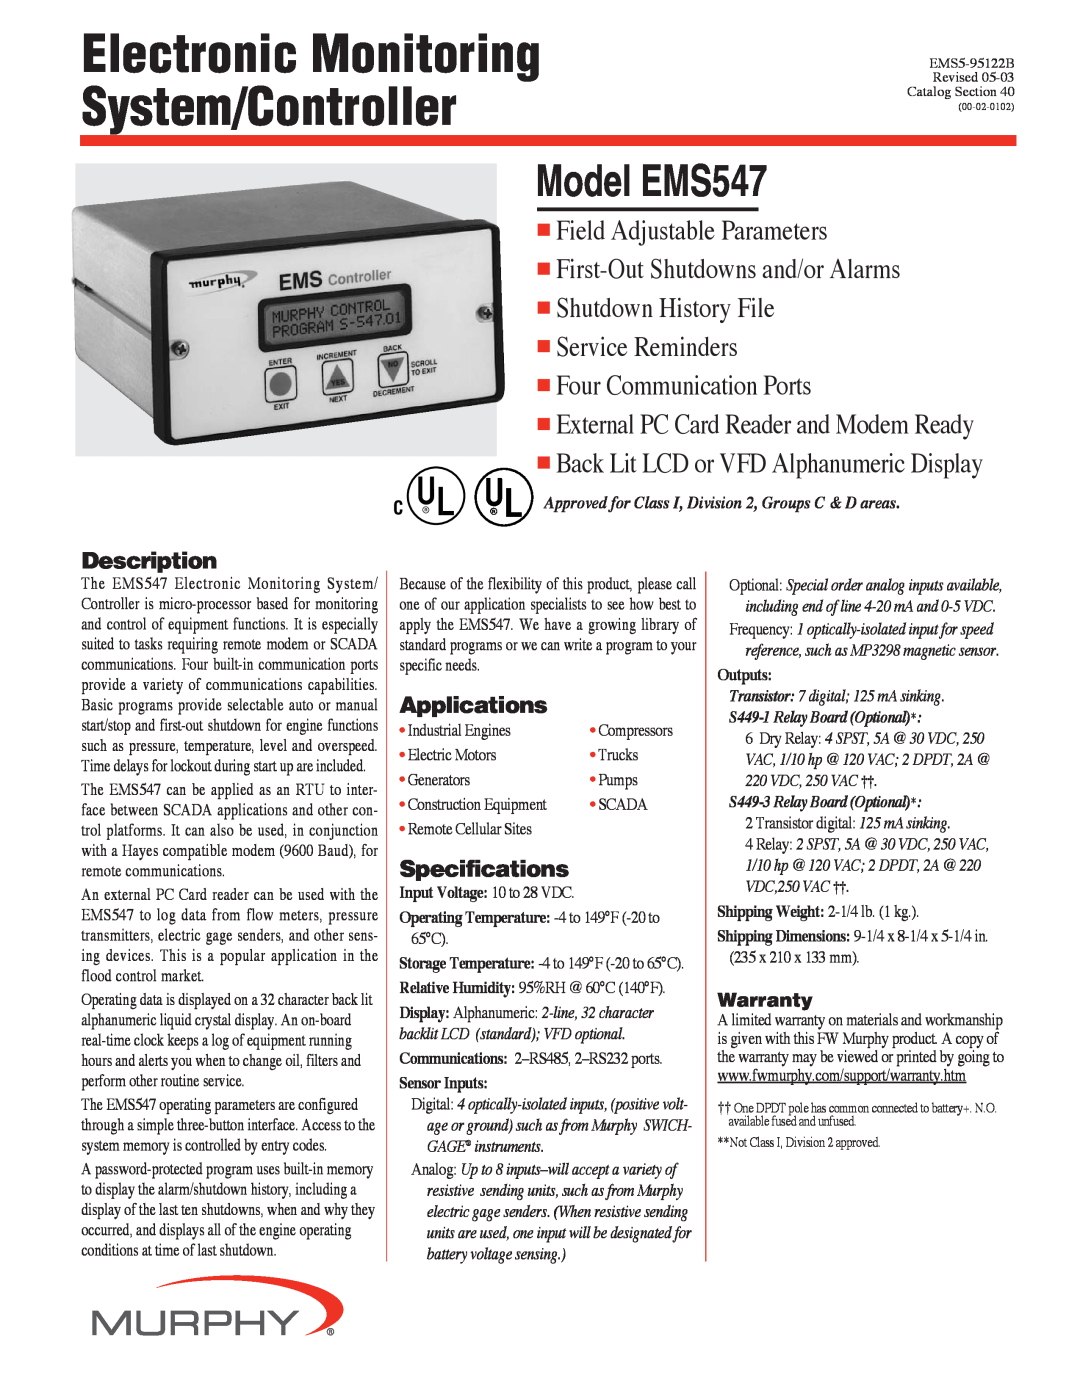 Murphy EMS547 specifications Description, Applications, Specifications, Electronic Monitoring System/Controller, Warranty 